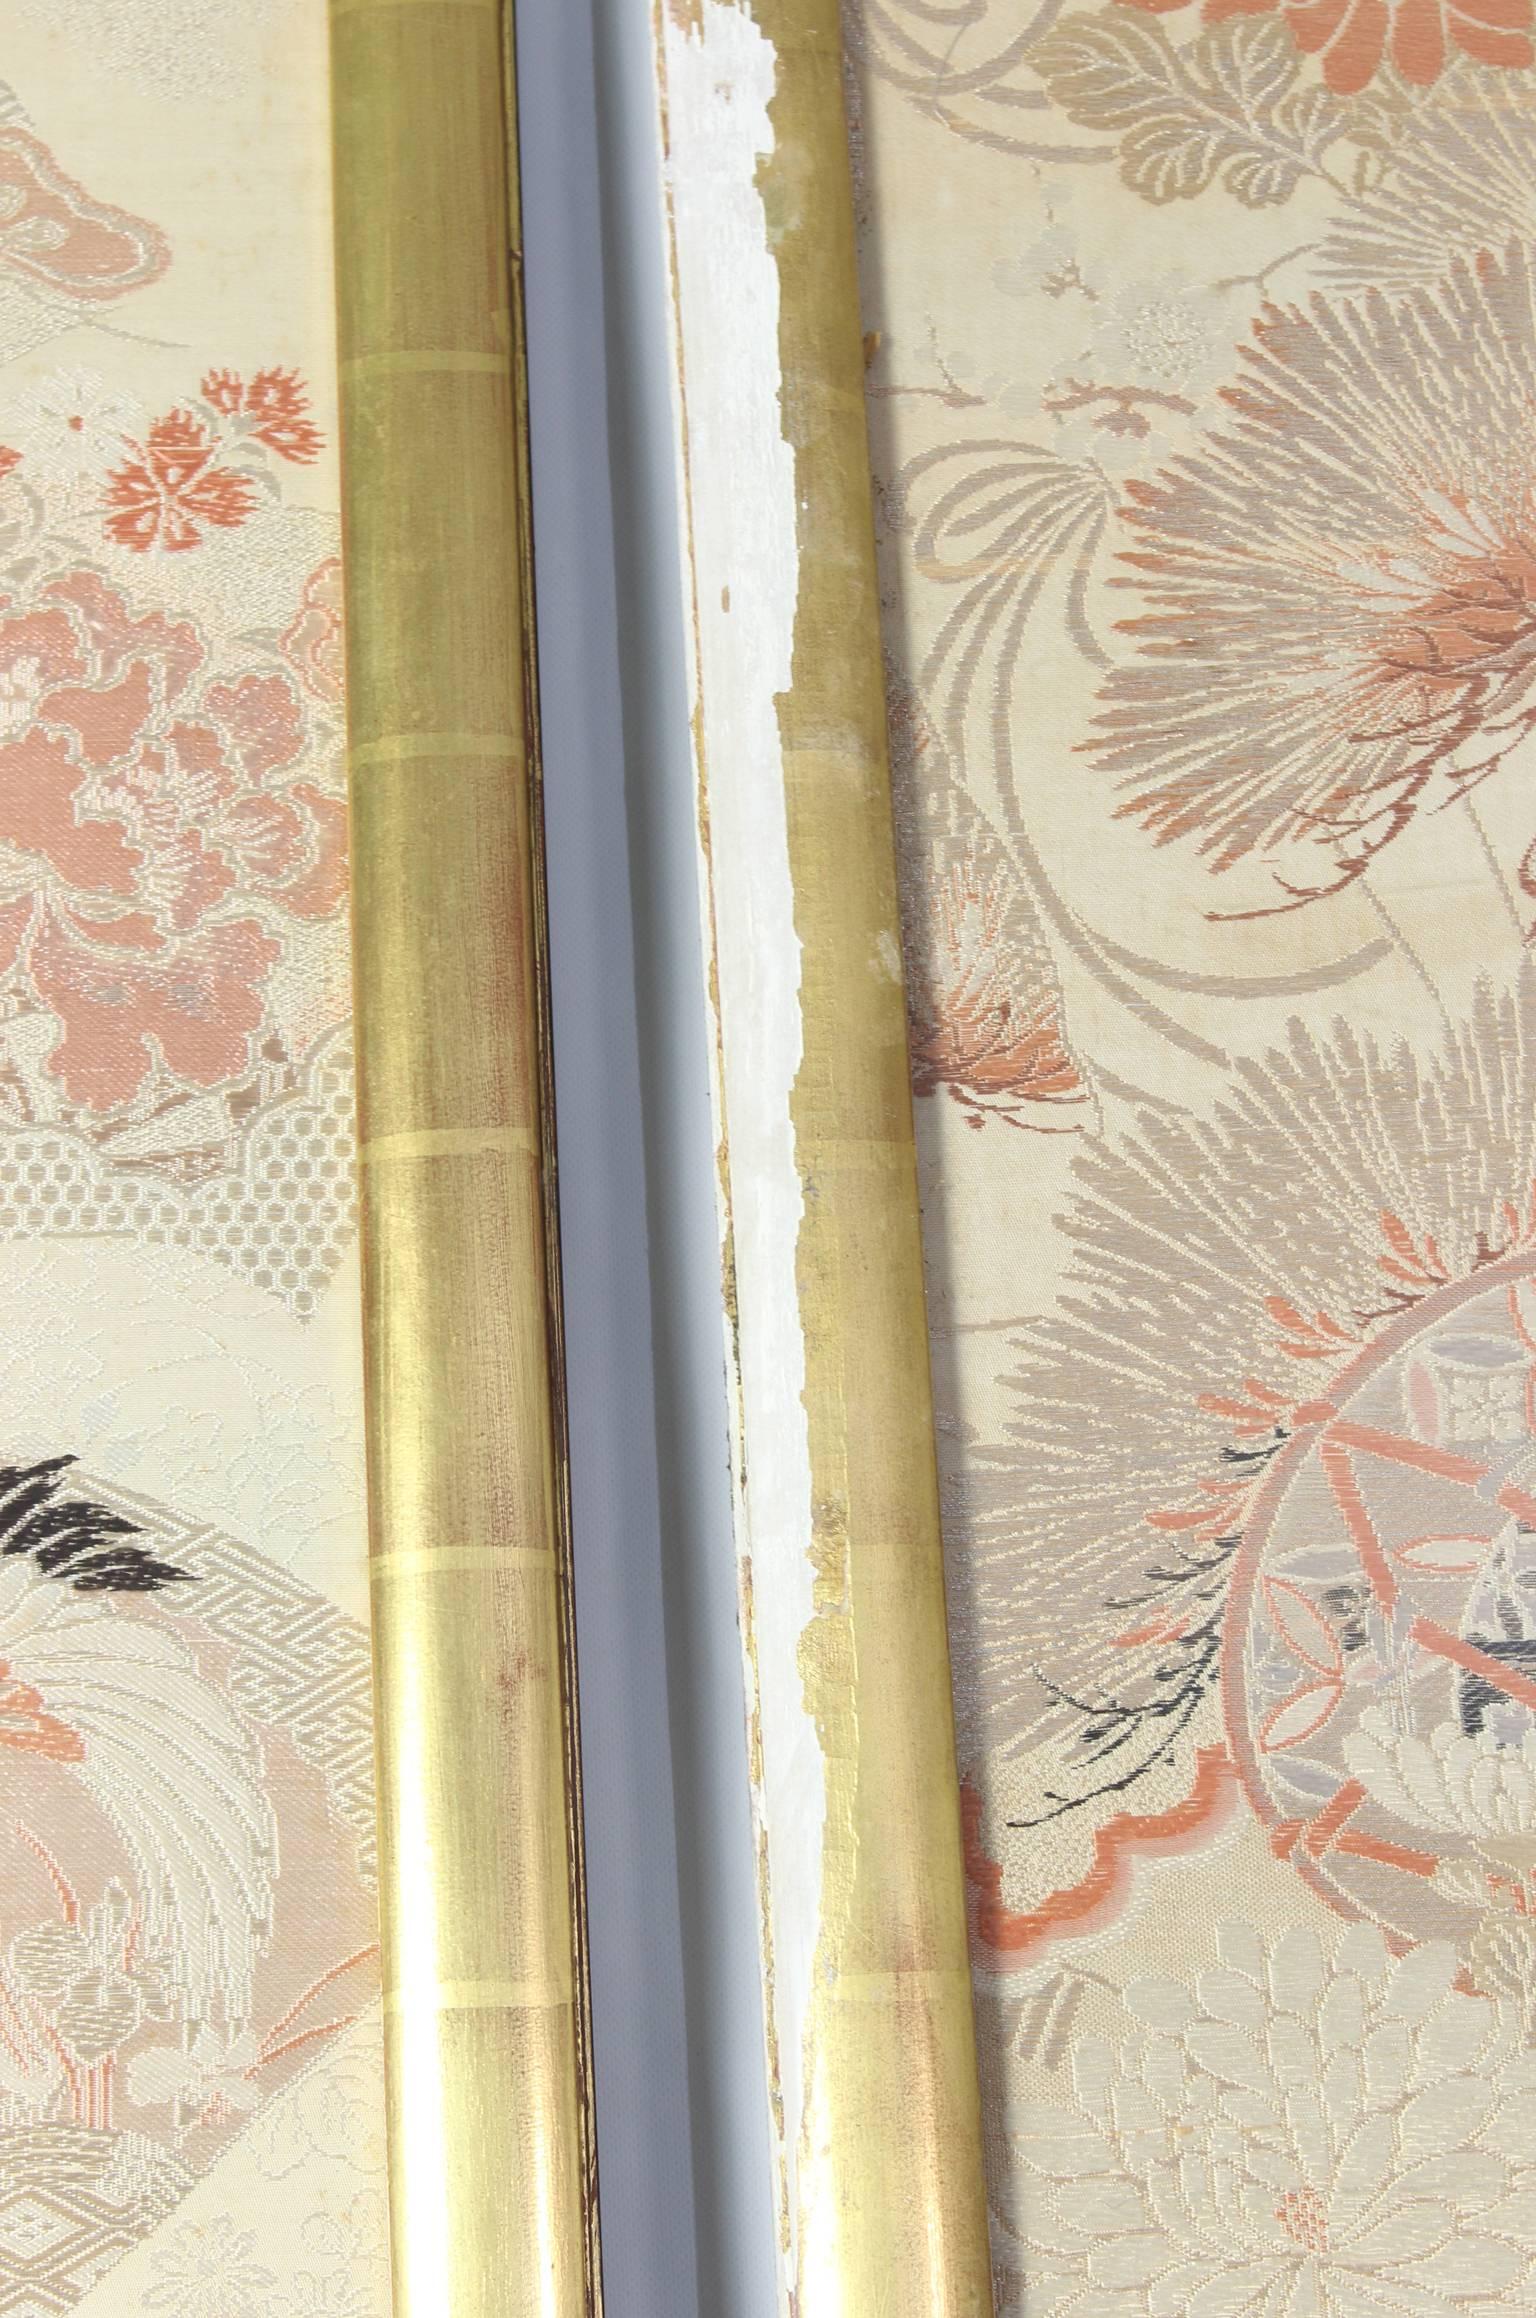 Exceptionally Large Japanese Brocade Silk Panels in Gilt Frames For Sale 4